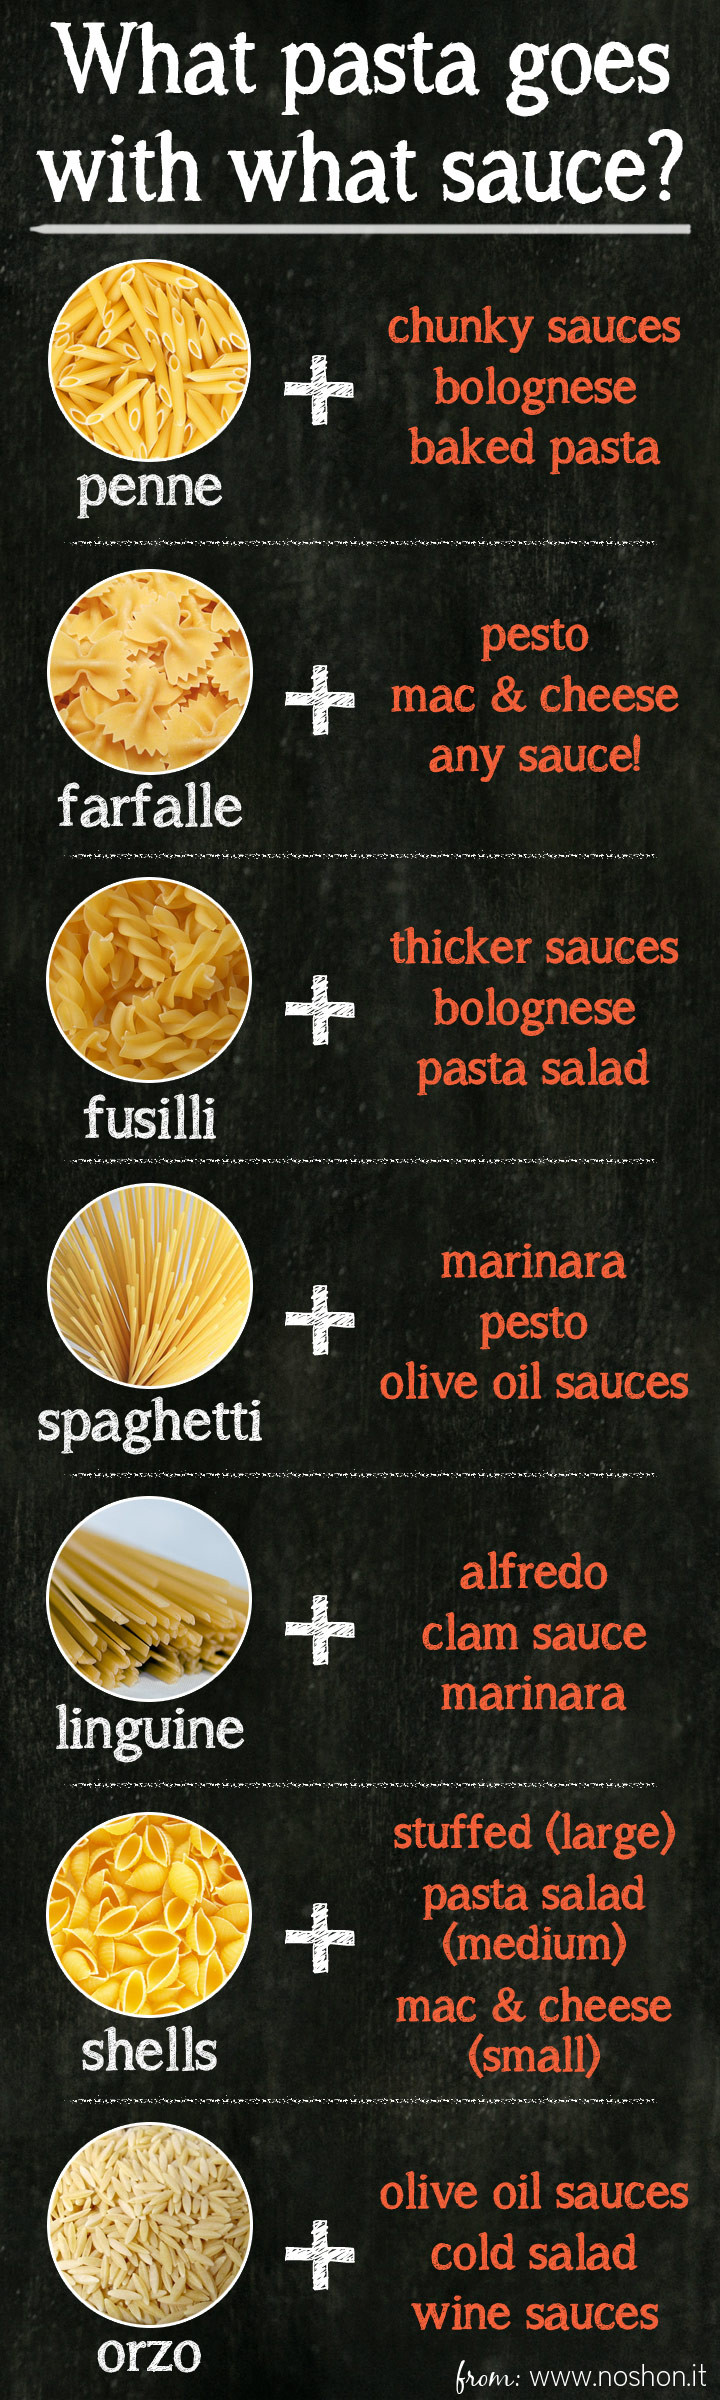 Pasta Sauces List
 Italian Pasta and Sauces Guide [Infographic]